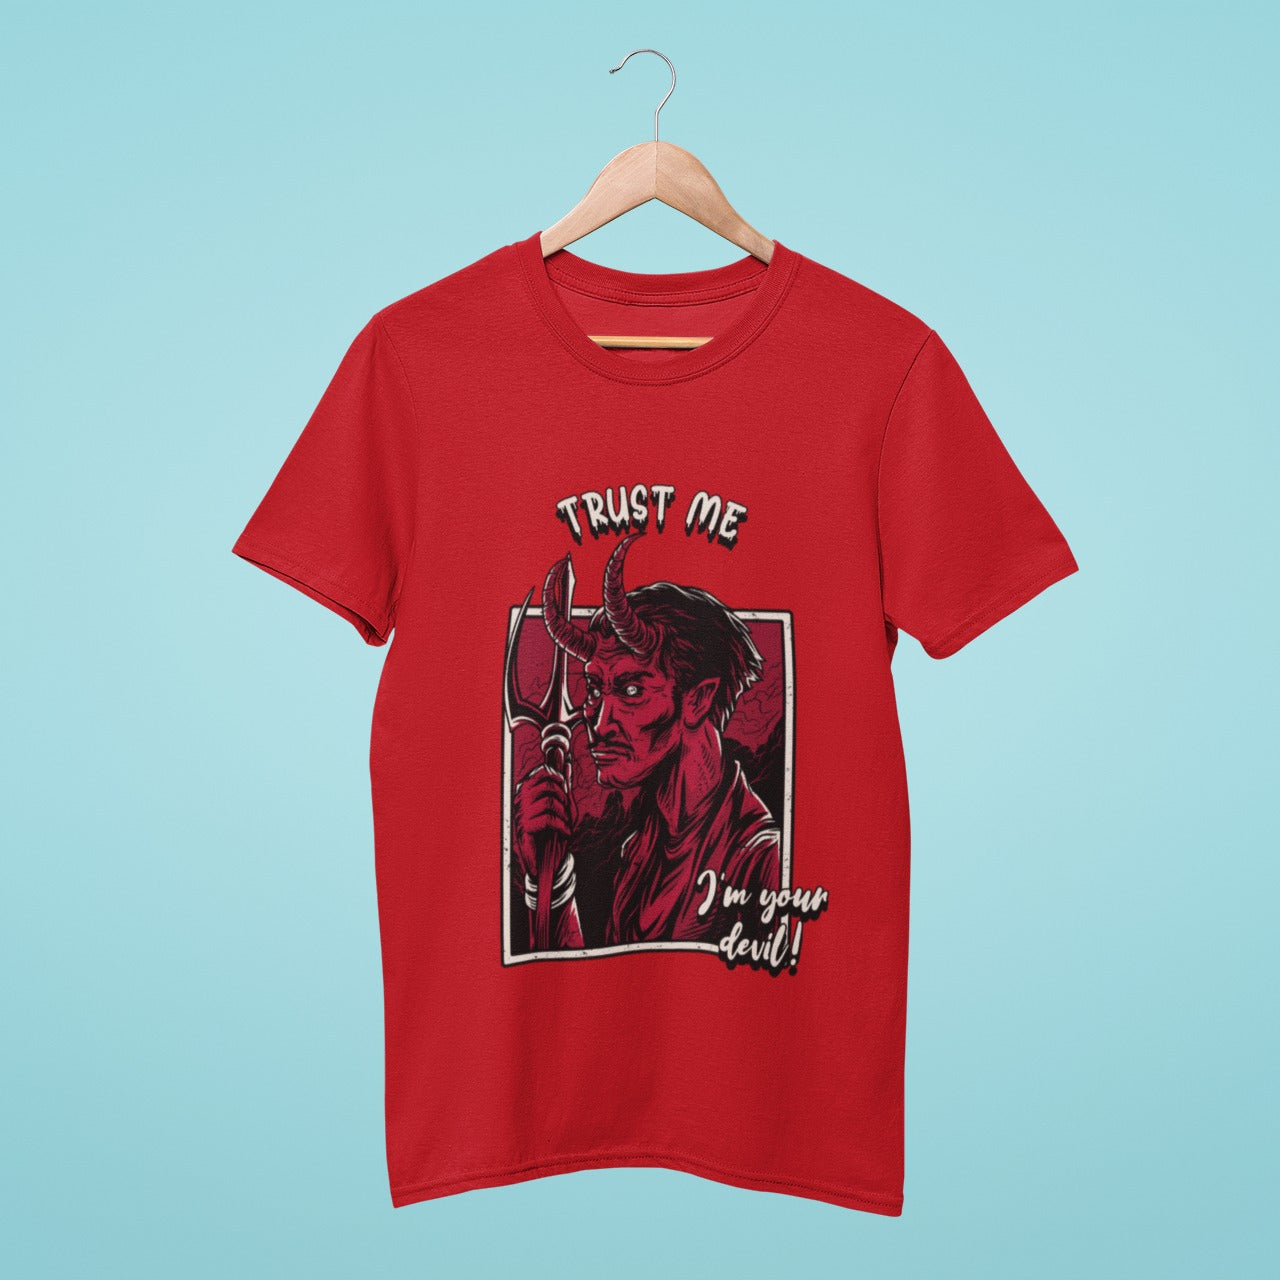 Unleash your devilish side with this bold red t-shirt featuring a graphic of the devil holding his trident and the sassy slogan "Trust Me, I'm Your Devil". Perfect for making a statement and showing off your wicked sense of humor. Get yours today!